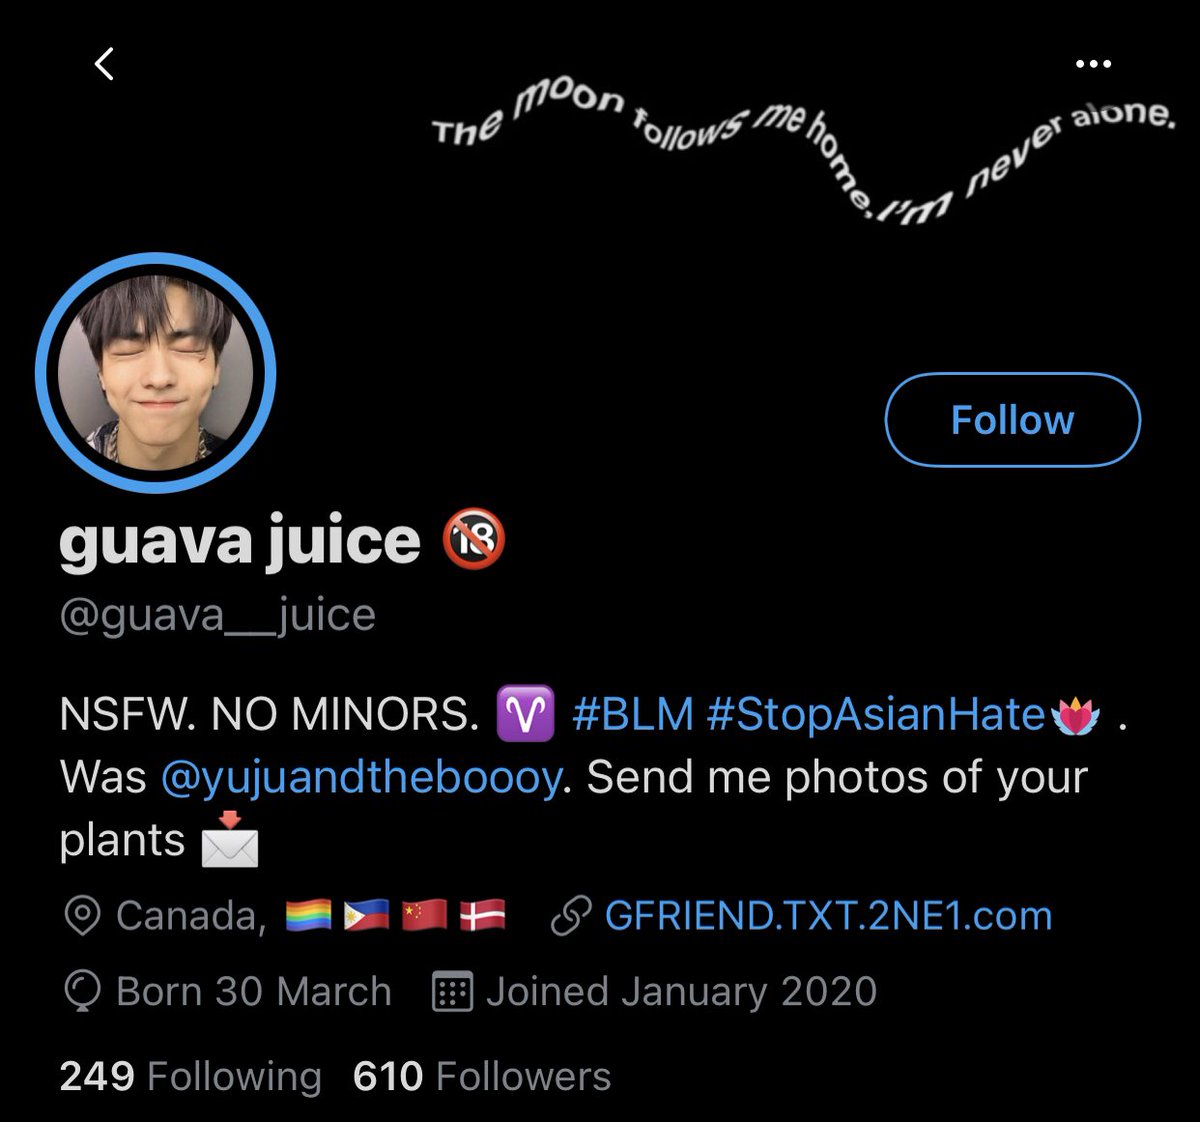 thoughts on @.guava__juice ? (used to be ygprpackage, yujuandtheboooy)